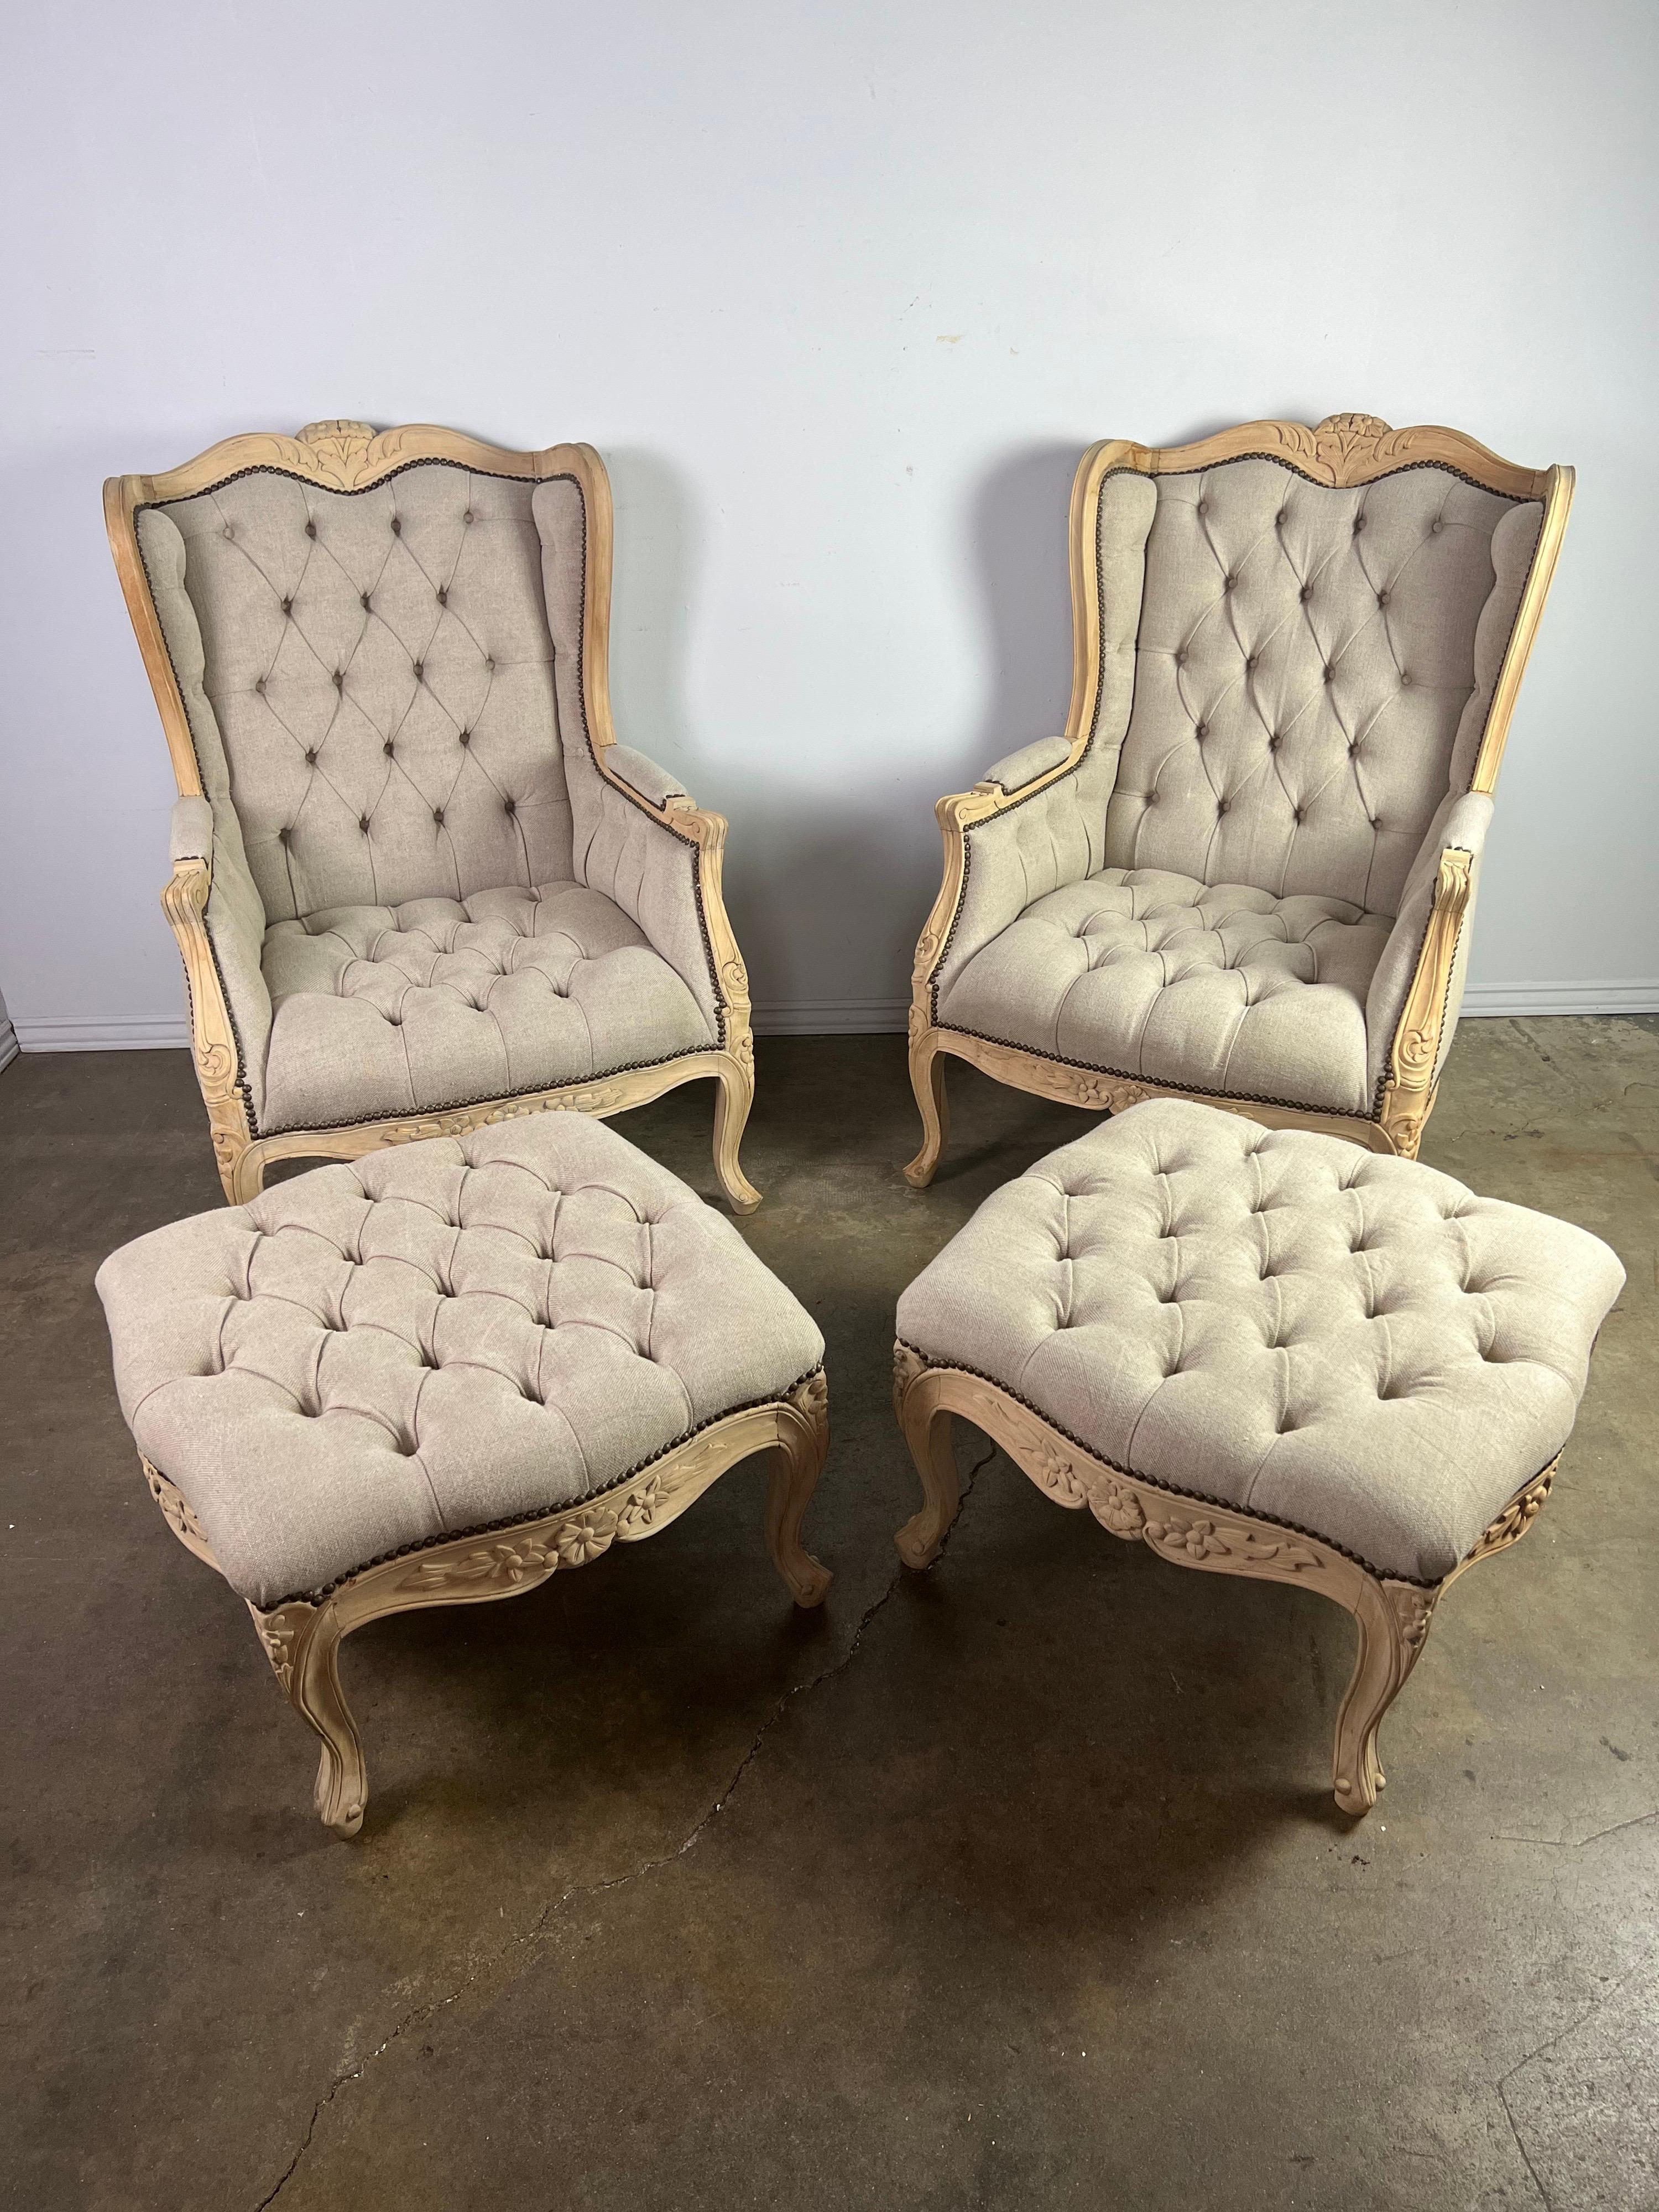 Pair of French carved bleached walnut wingback armchairs w/ matching ottomans. The chairs and ottomans stand on cabriole legs with rams head feet. The chairs are newly upholstered in a washed tufted Belgium linen with nailhead trim detail.

The